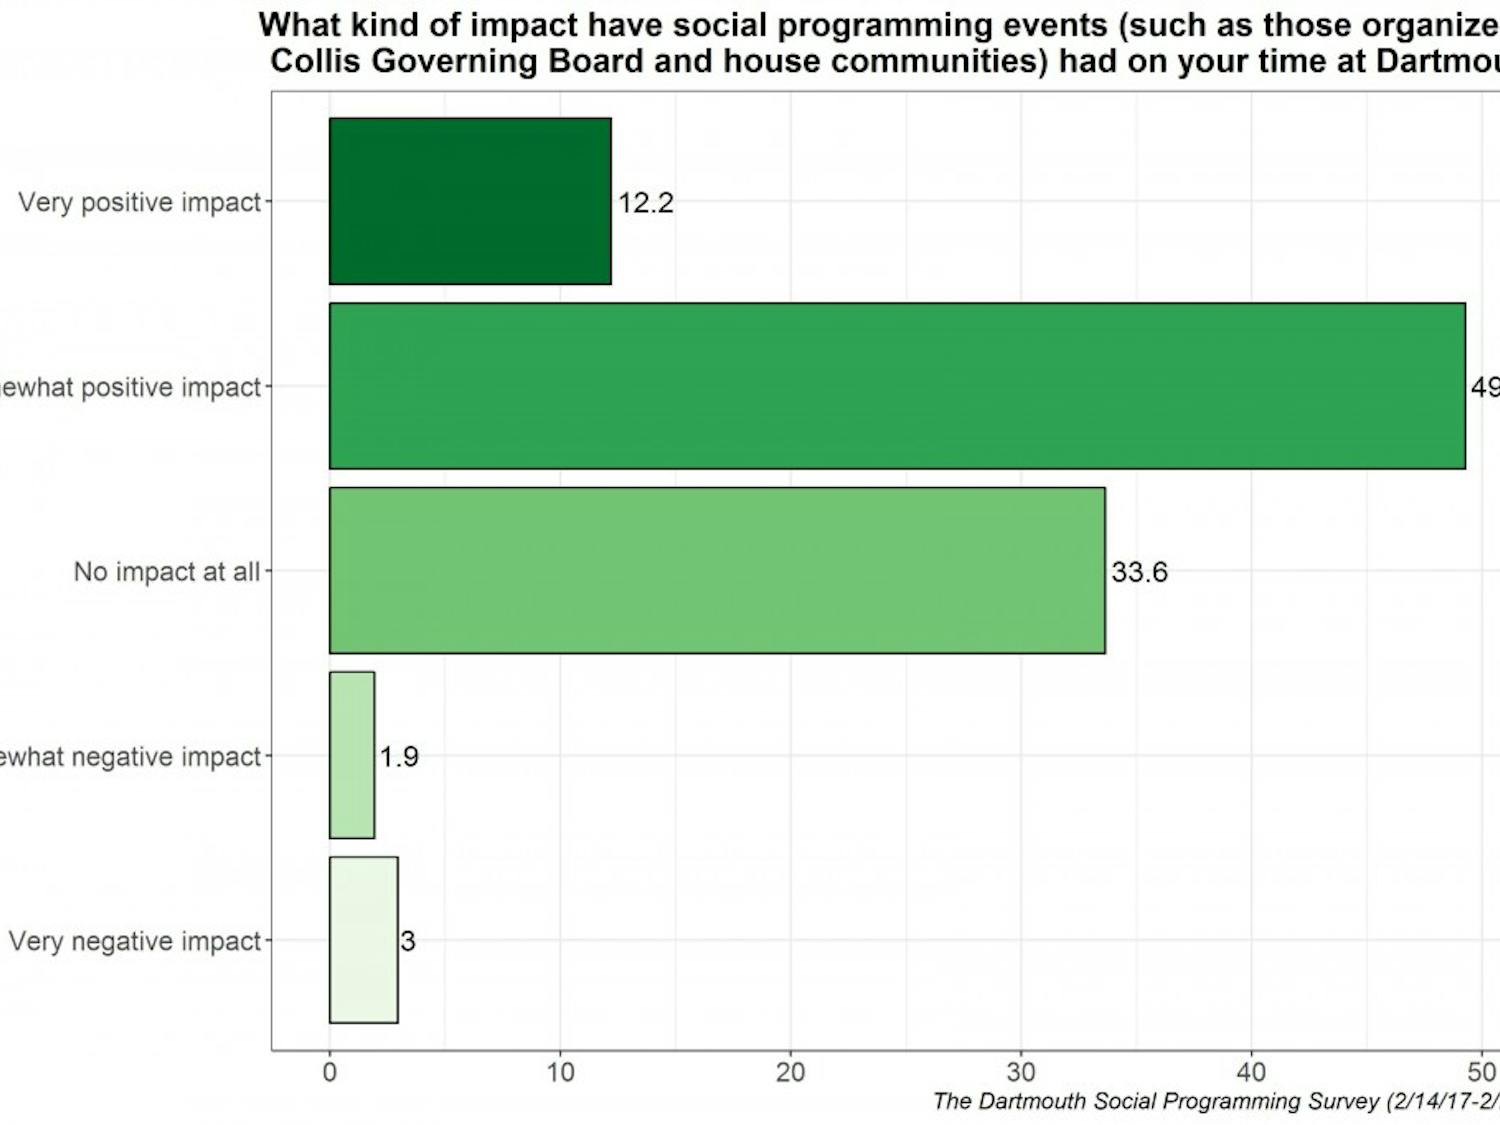 Out of 334 respondents, 49.3 percent said social programming events have a somewhat positive impact on their time at Dartmouth.&nbsp;(Note: Data is in percentages.)